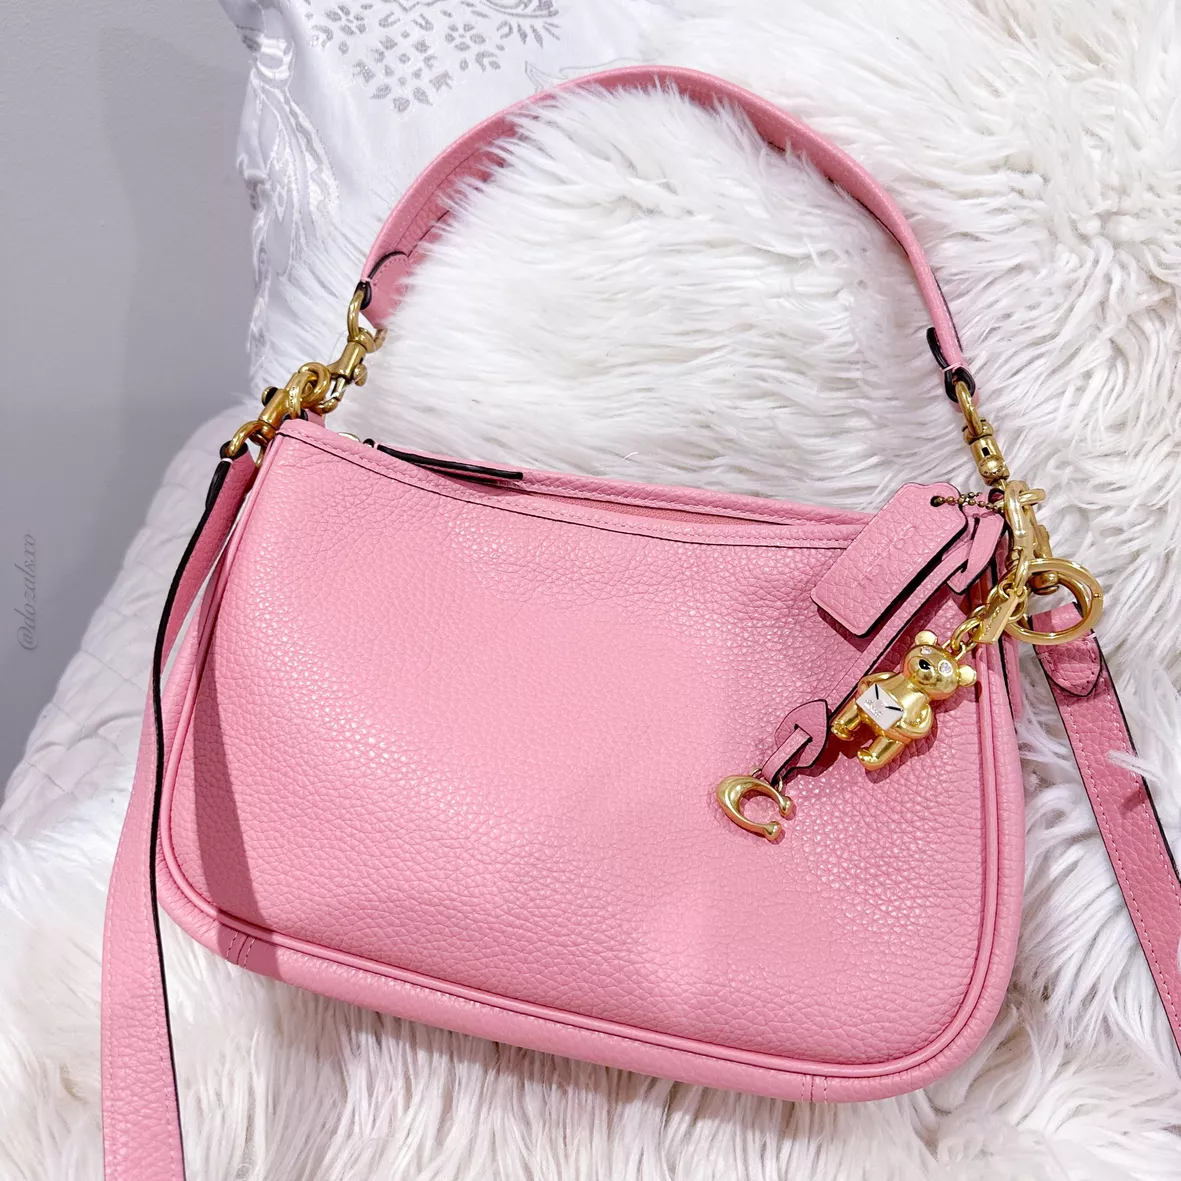 COACH Soft Pebble Leather Cary Shoulder Bag in Pink